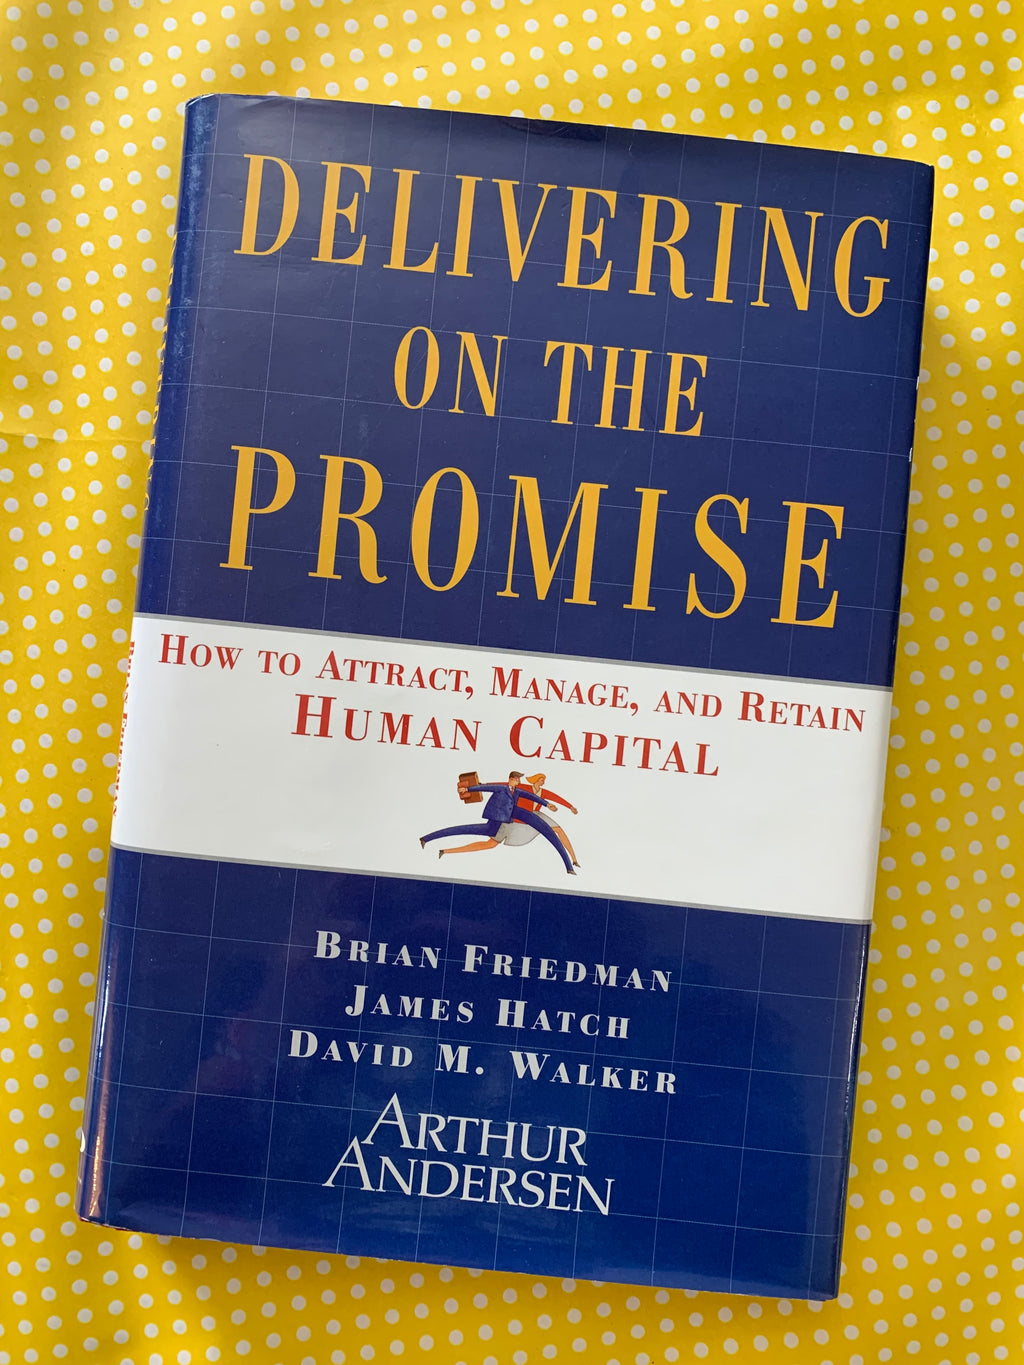 Delivering on the Promise: How to Attract, Manage, and Retain Human Capital- By Brian Friedman, James Hatch, David M. Walker and Arthur Andersen